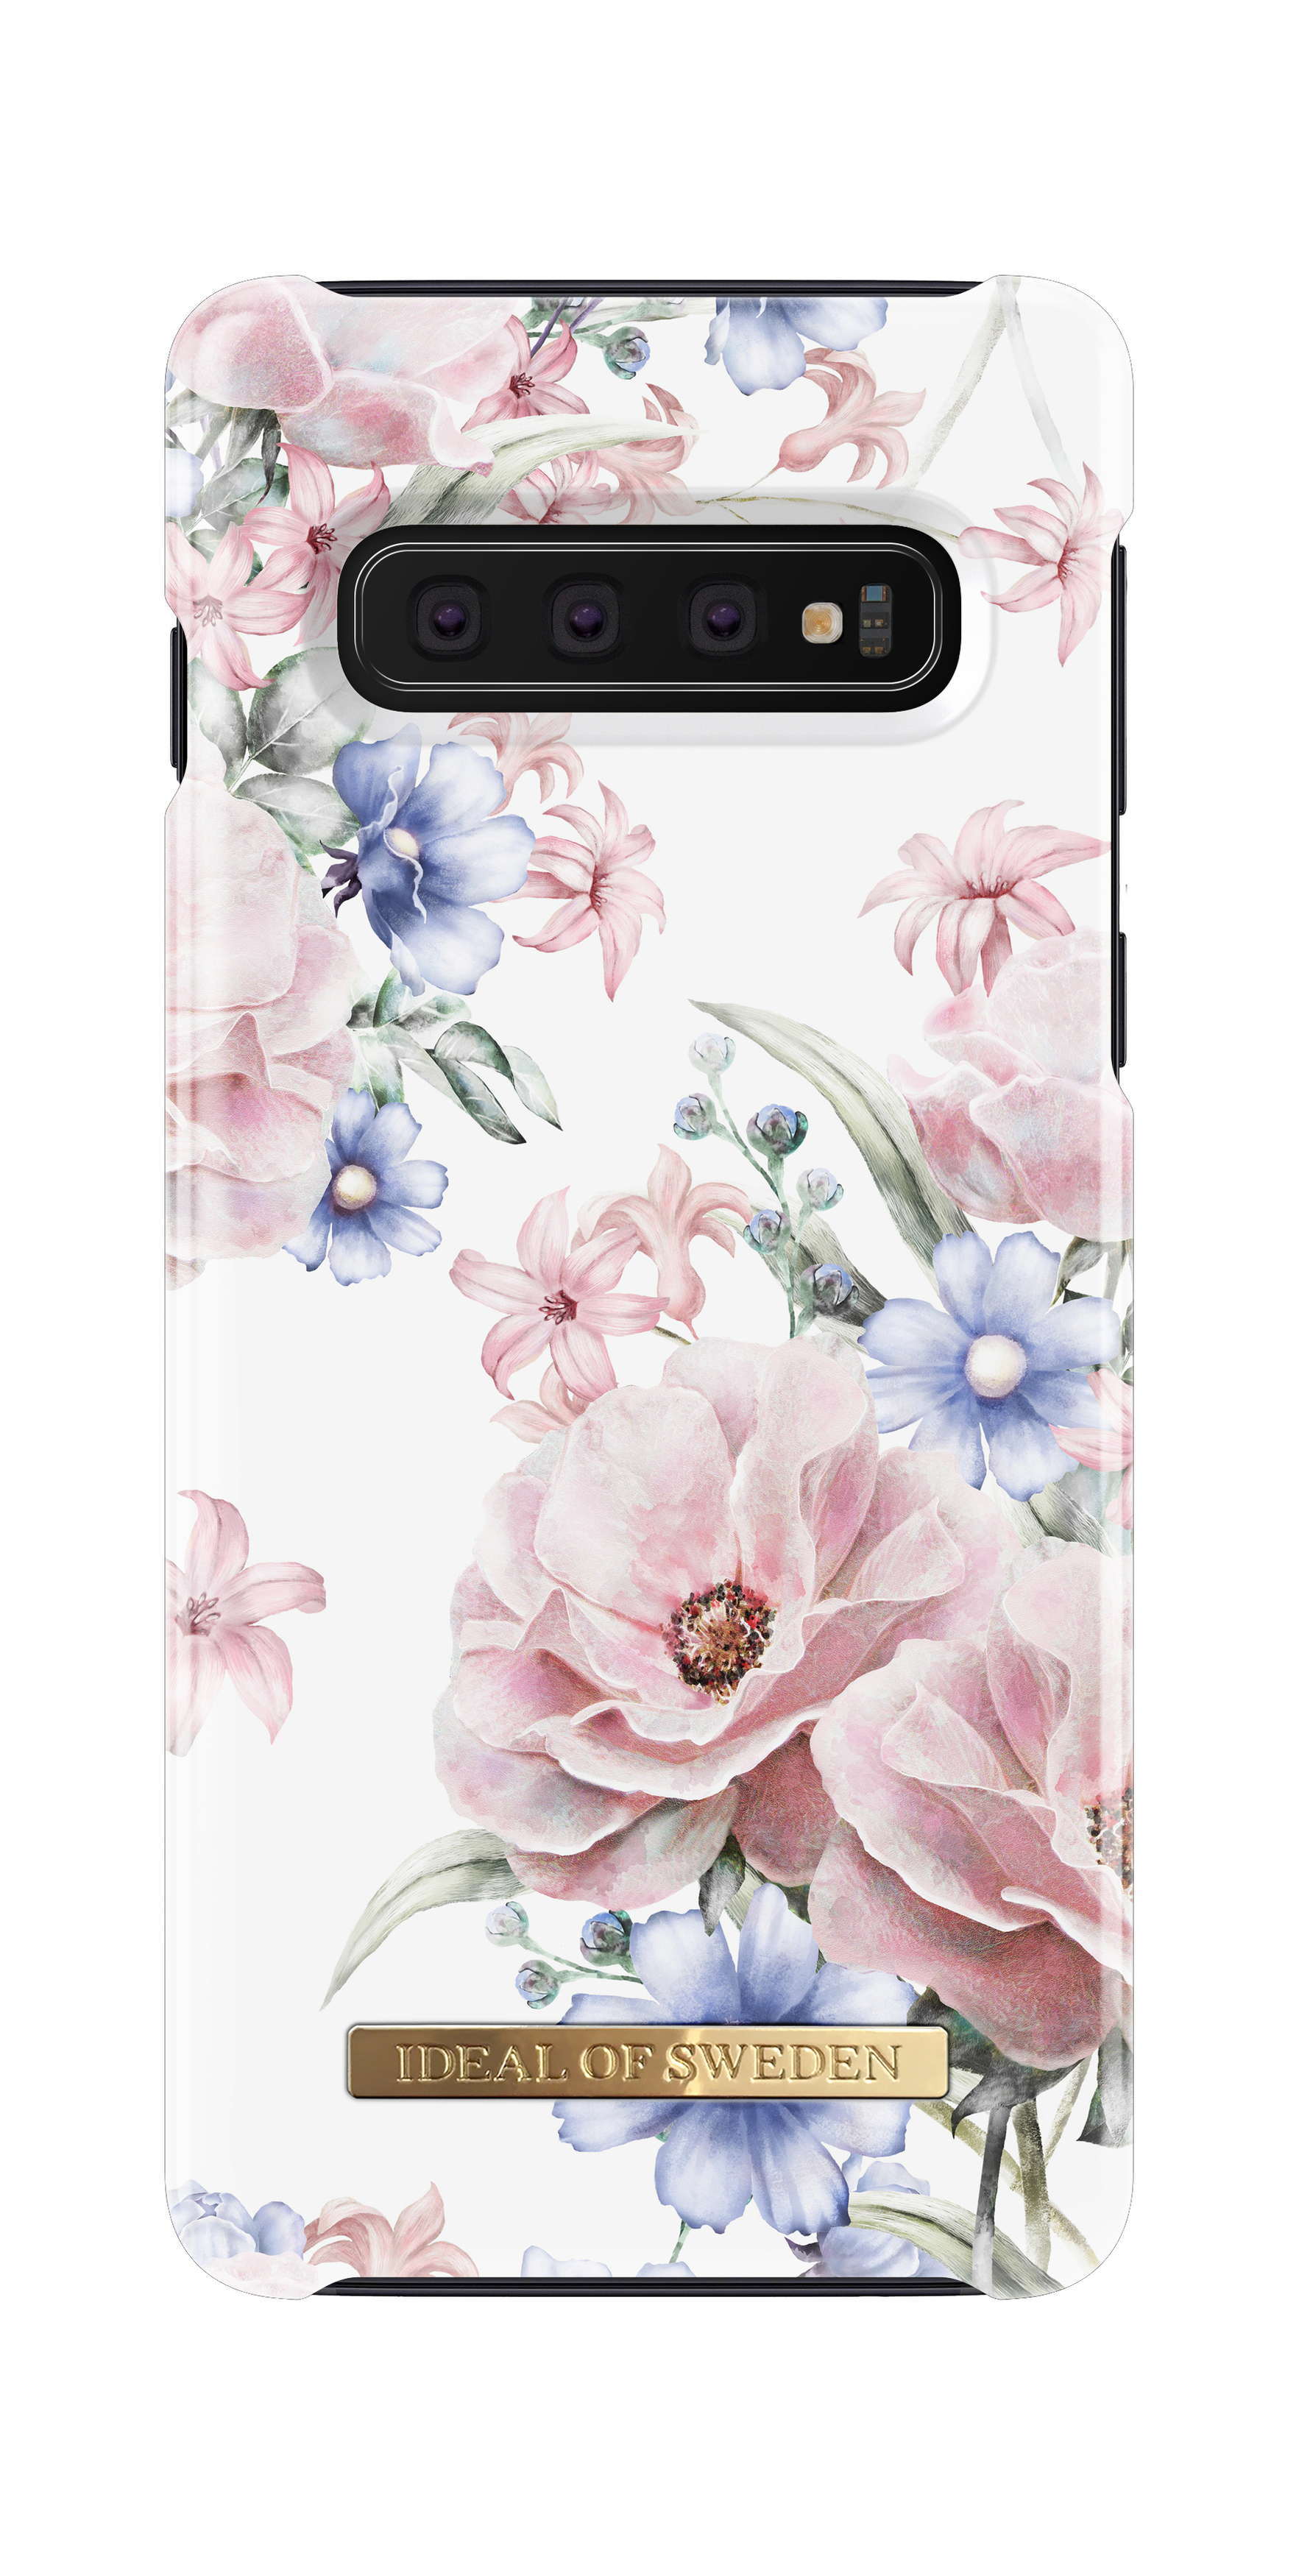 Fashion, IDEAL Samsung, SWEDEN Floral OF Romance Backcover, Galaxy S10,